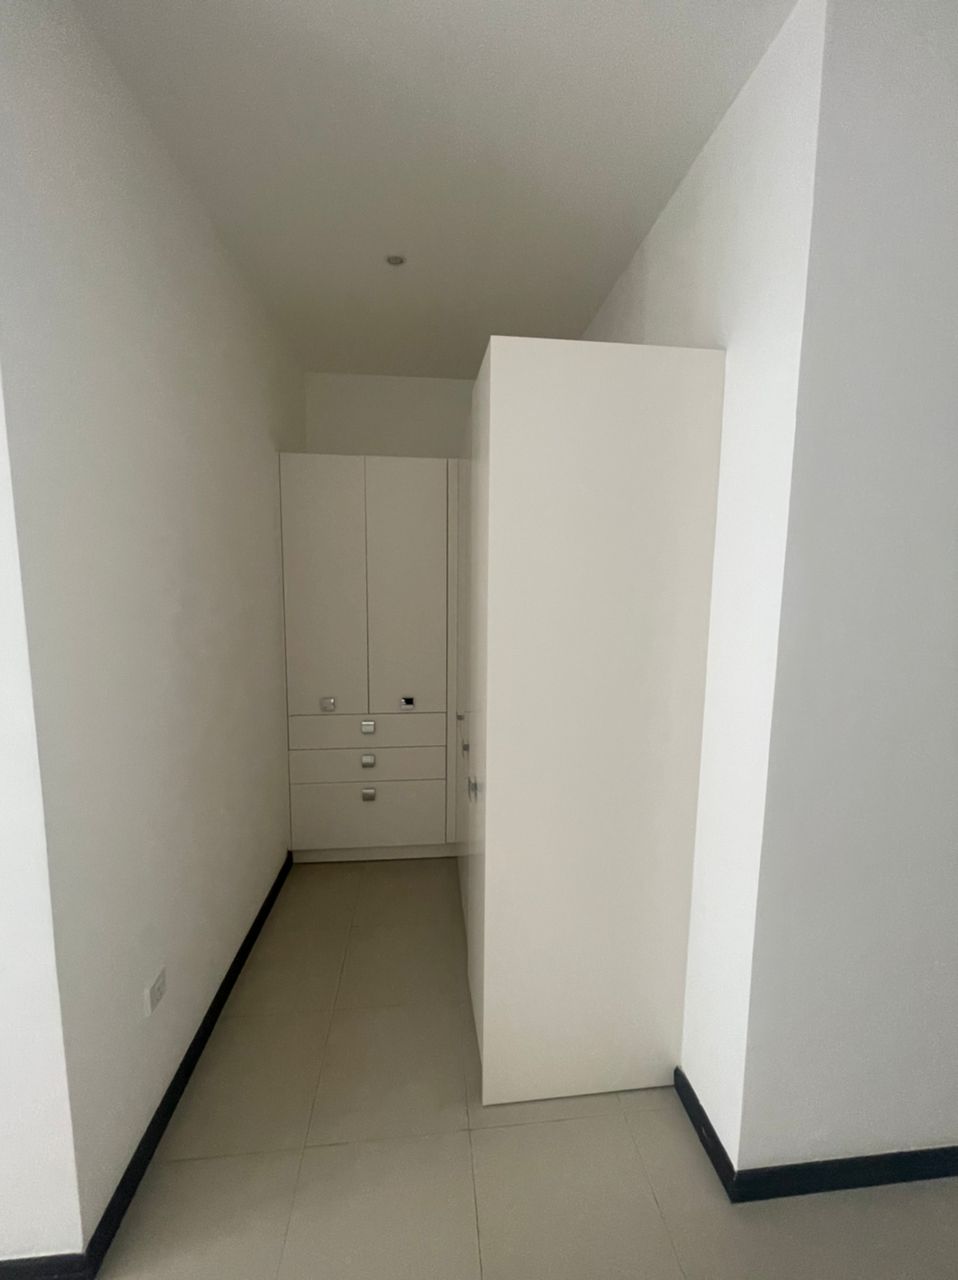 Three 3-Bedroom Furnished Apartment for Rent at Cantonment